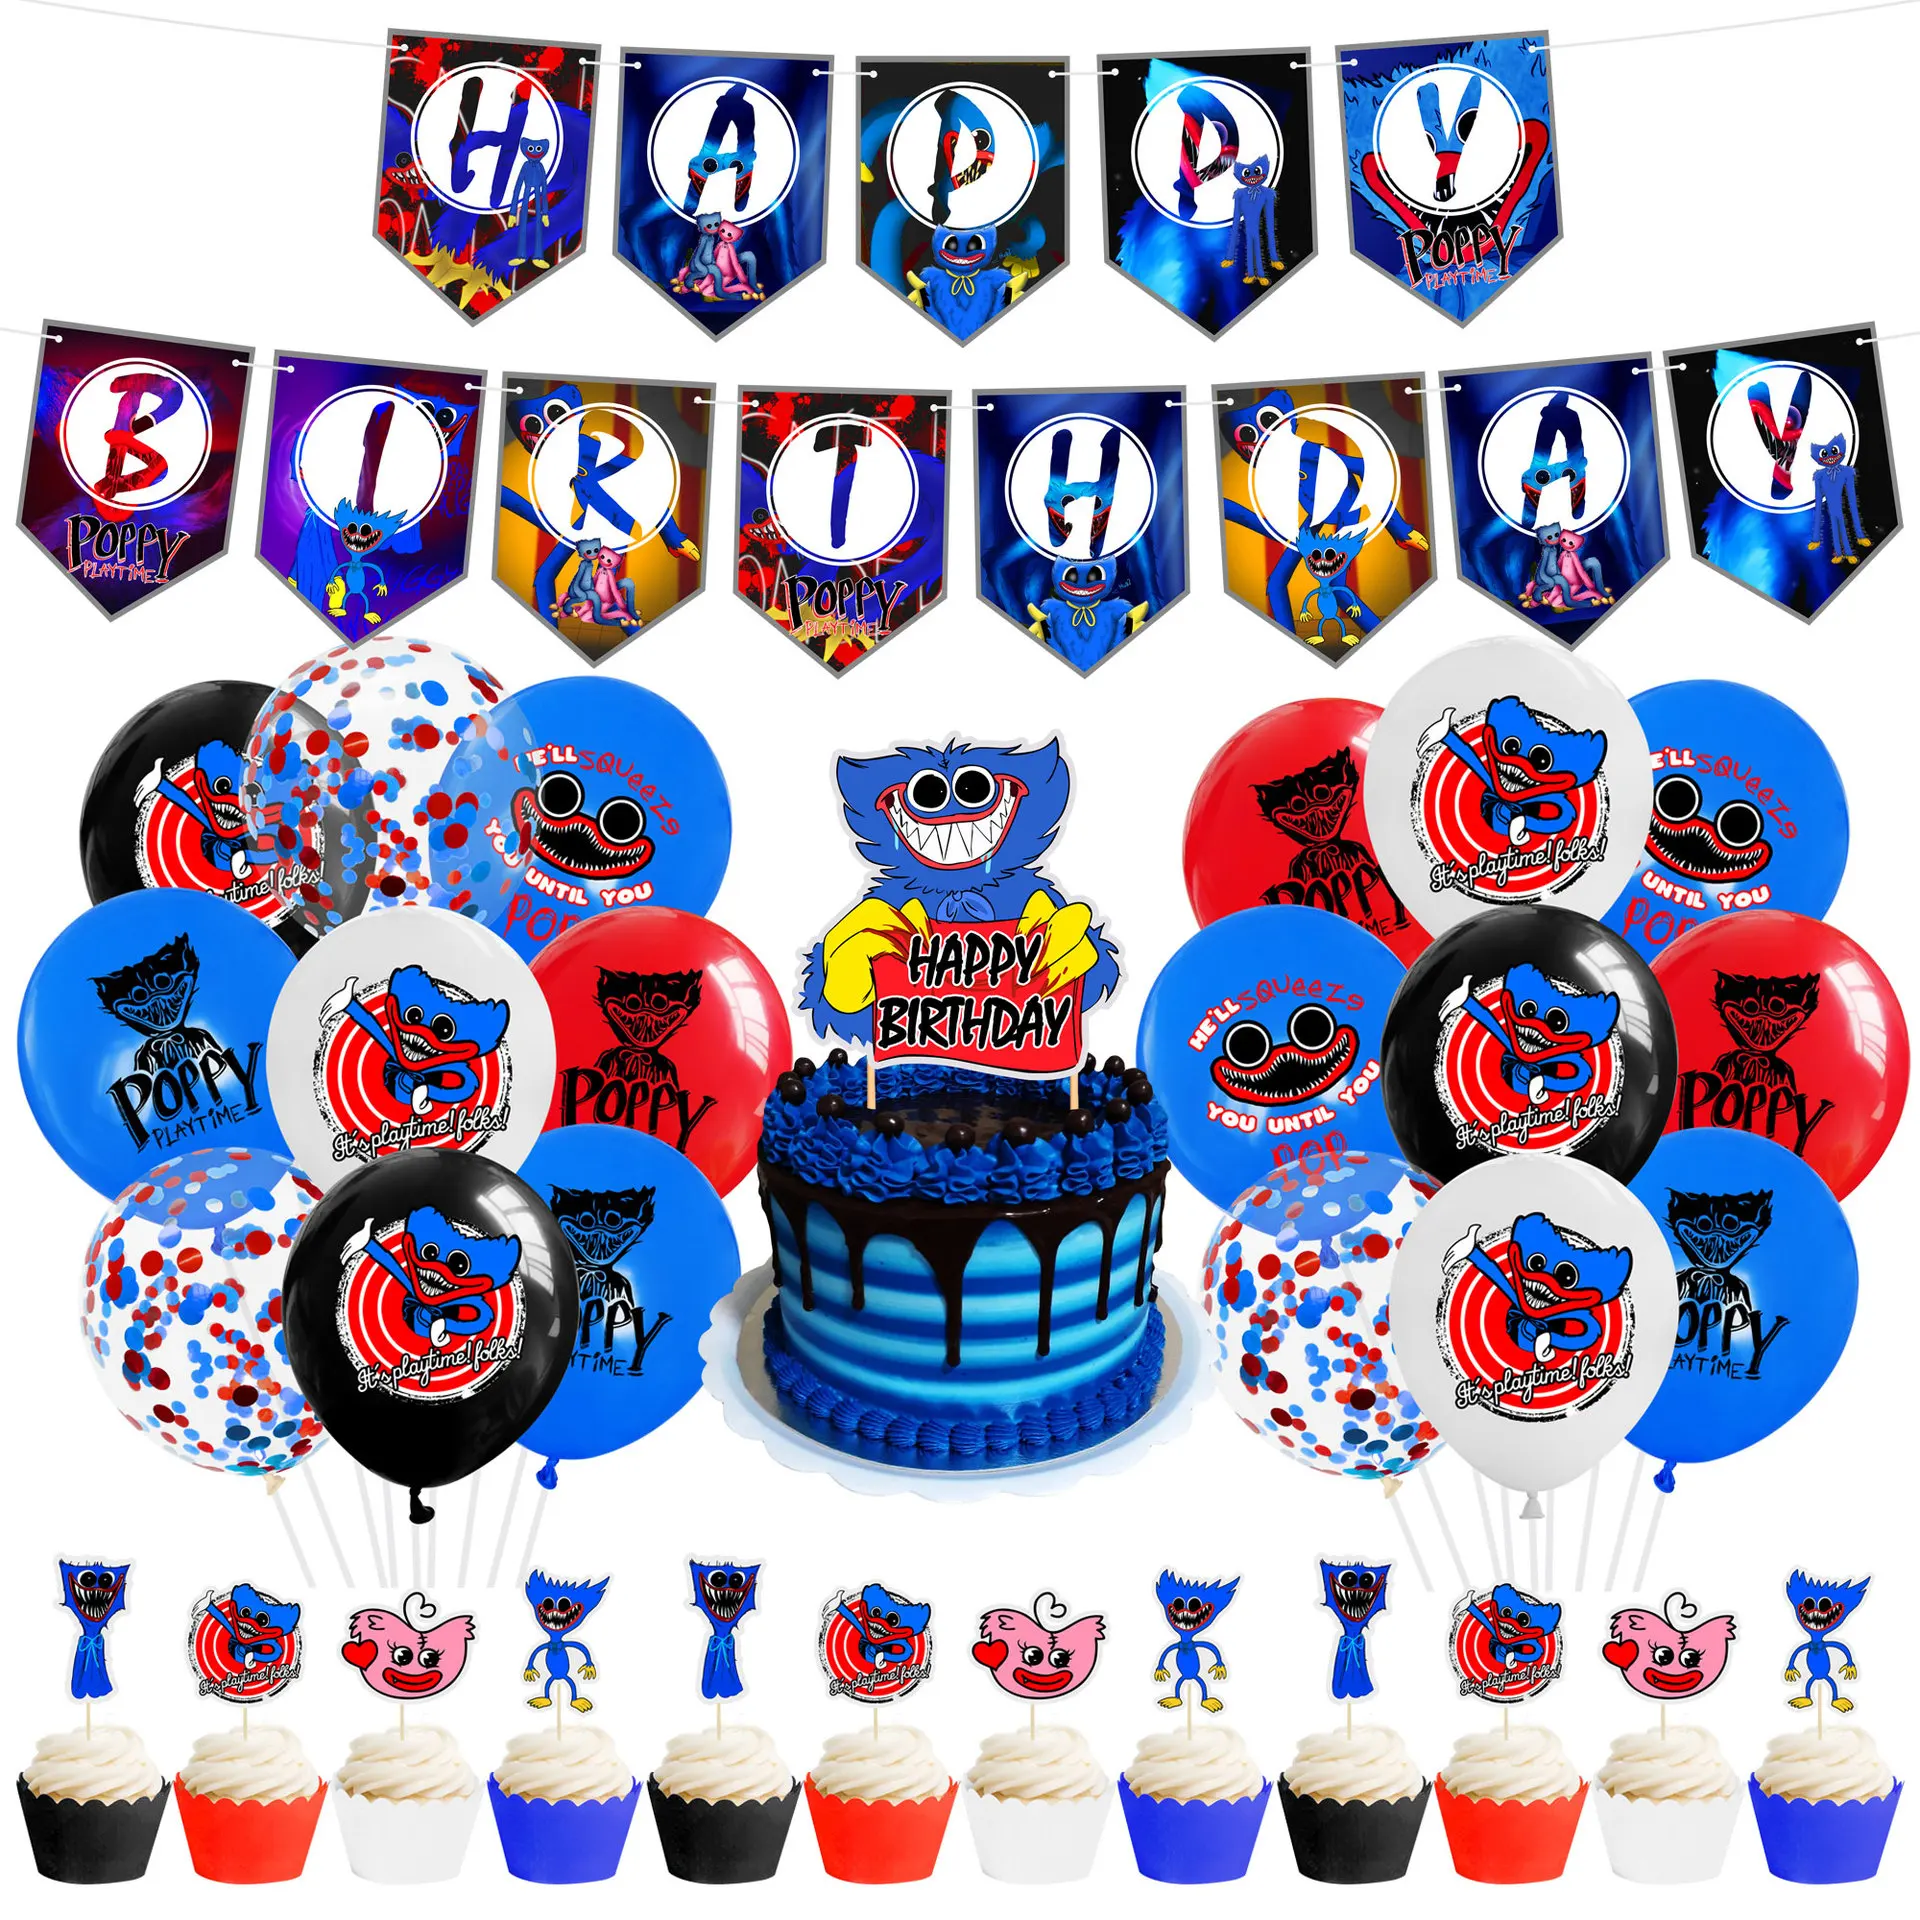 

Huggy Wuggy Poppy Playtime Birthday Party Decoration Supplies Hague Vagi Balloons Banner Cake Toppers Baby Shower Kids Toy Gift